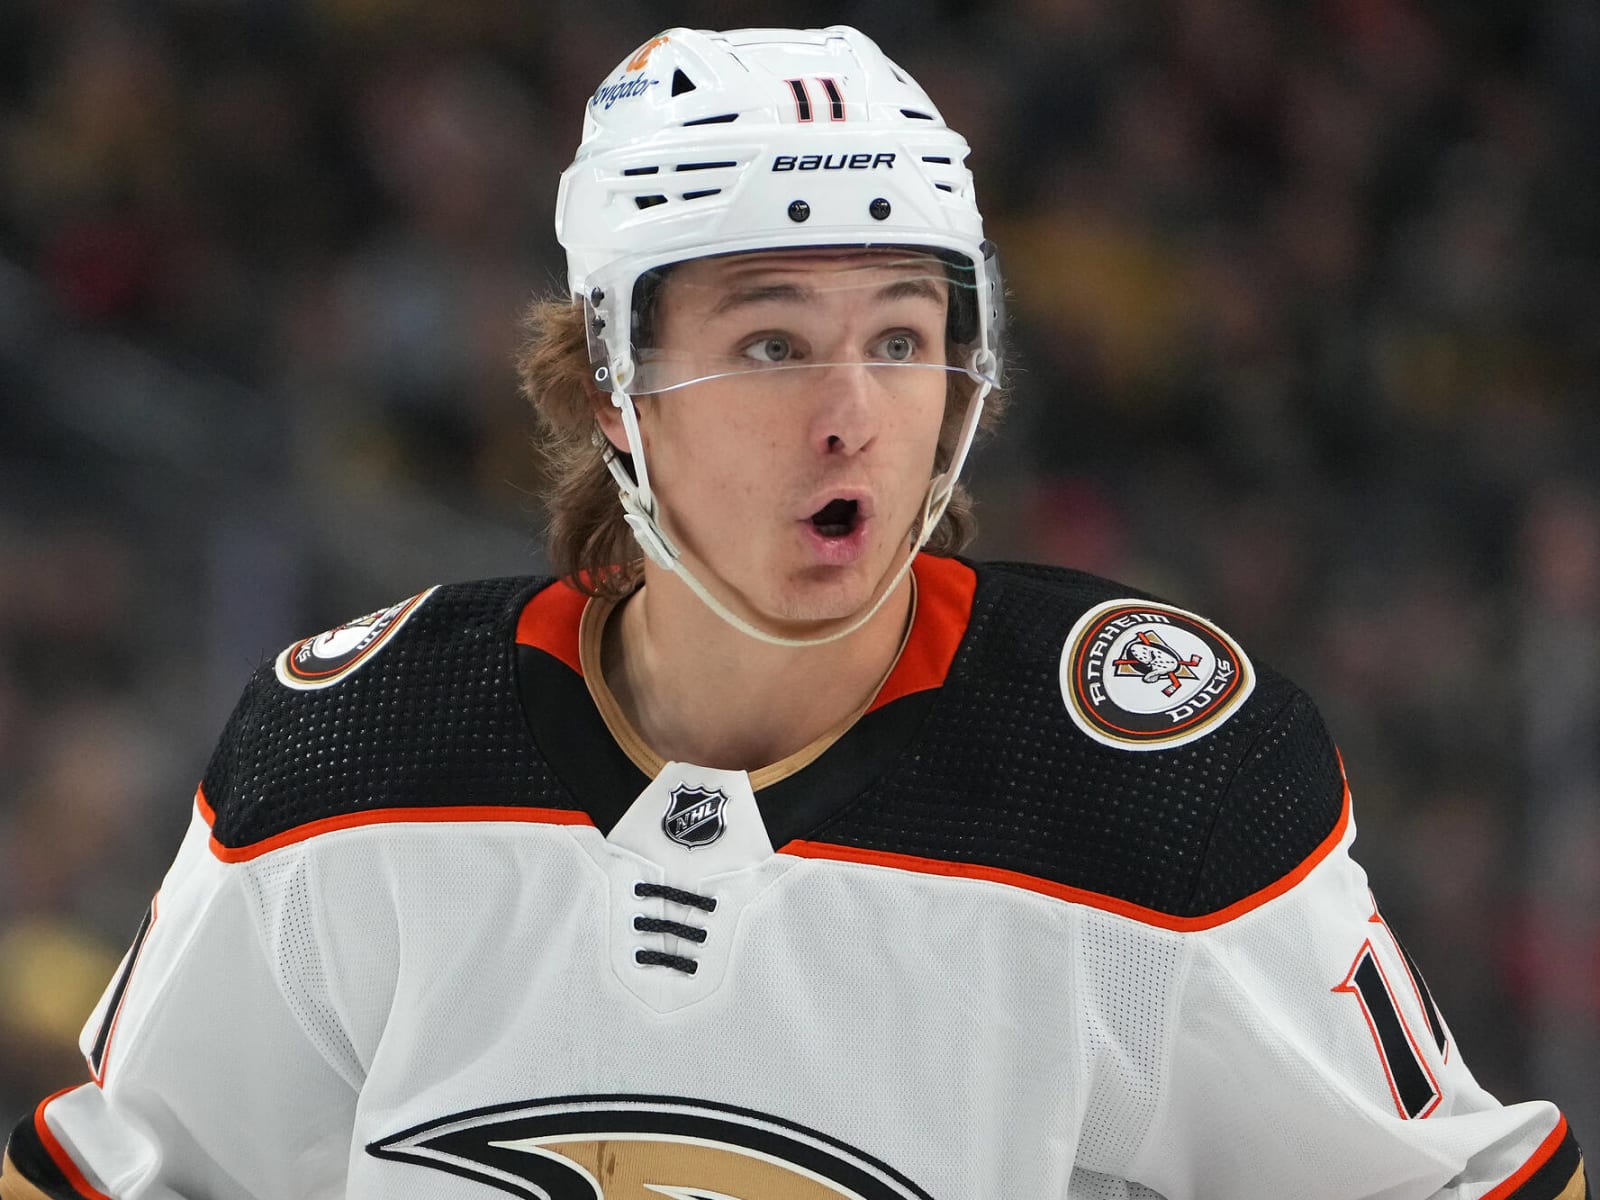 Zegras hopeful to ink new deal with Ducks soon